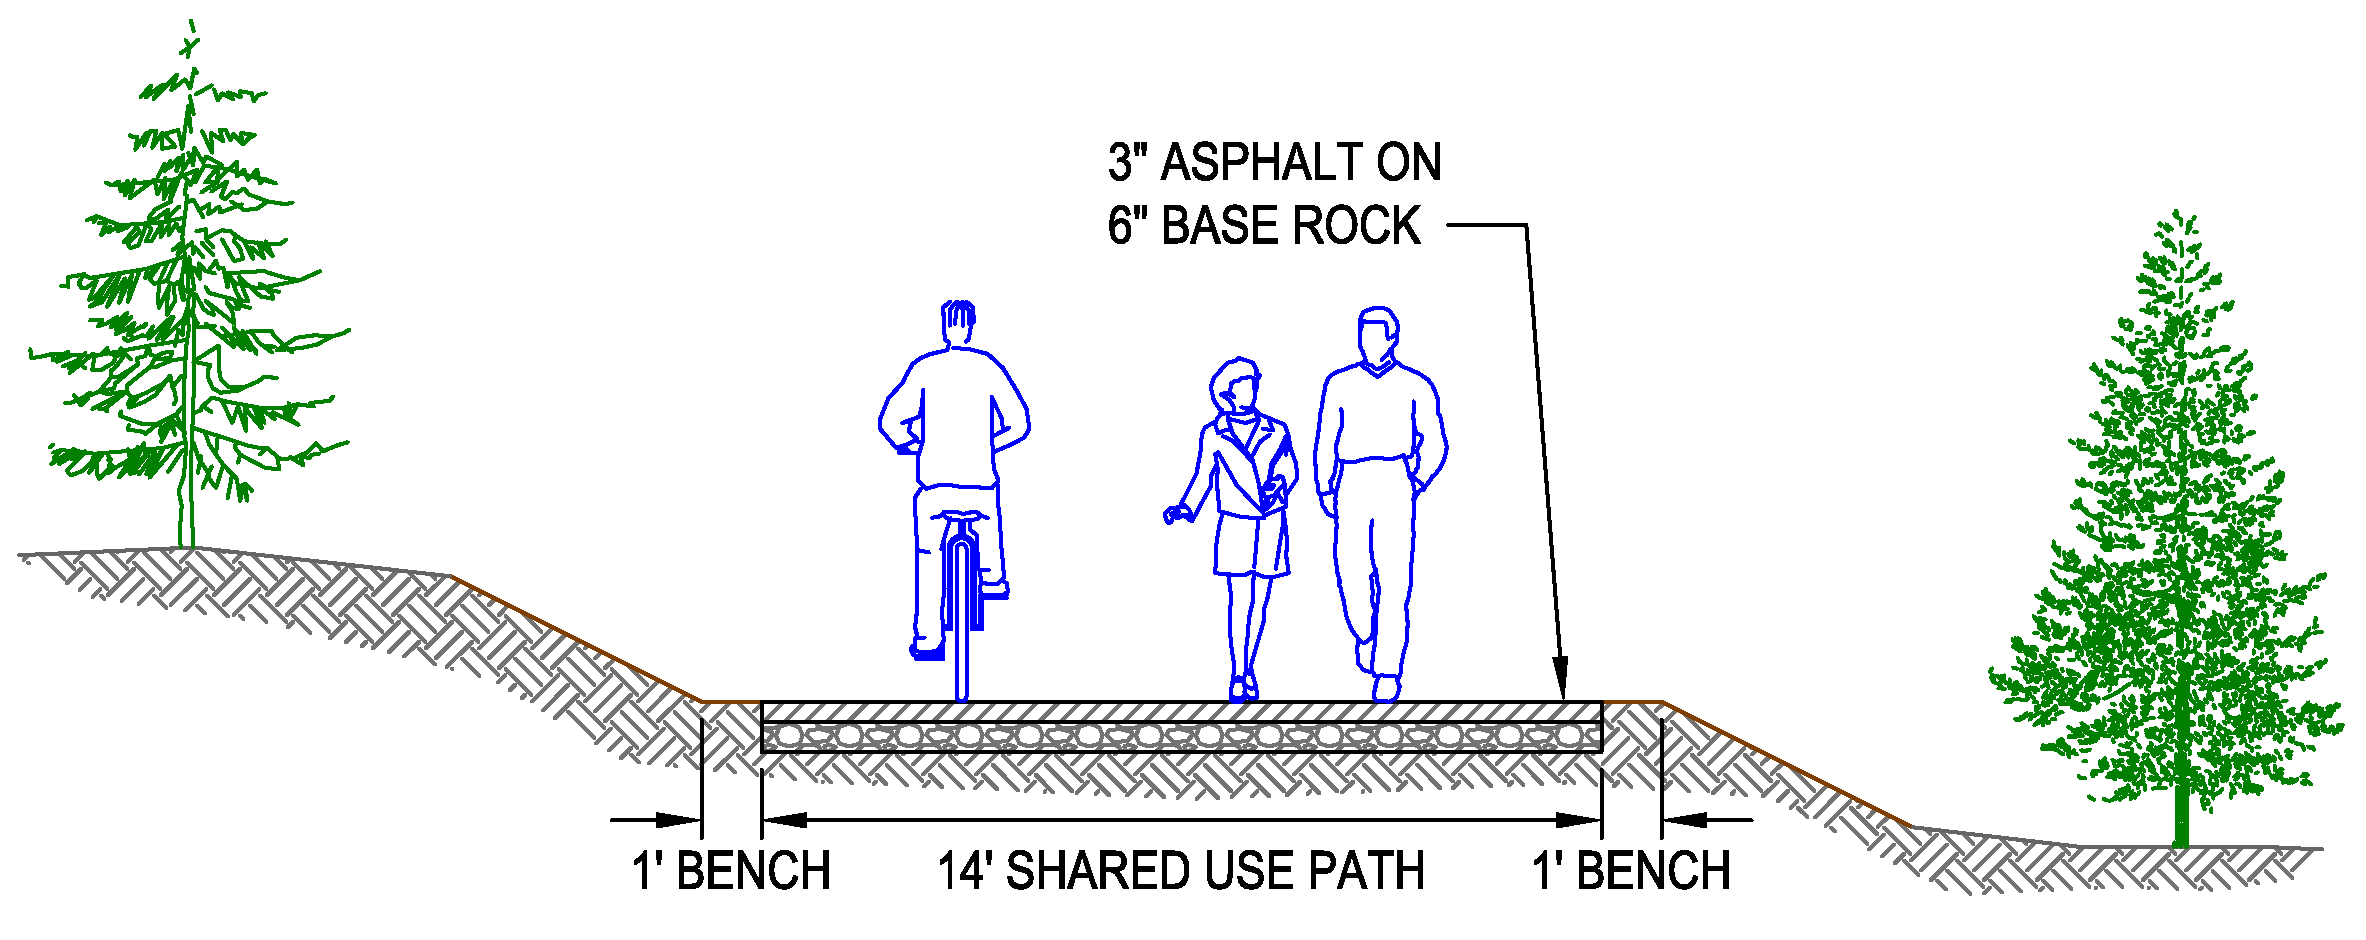 Sketch of multi-use path in the forest